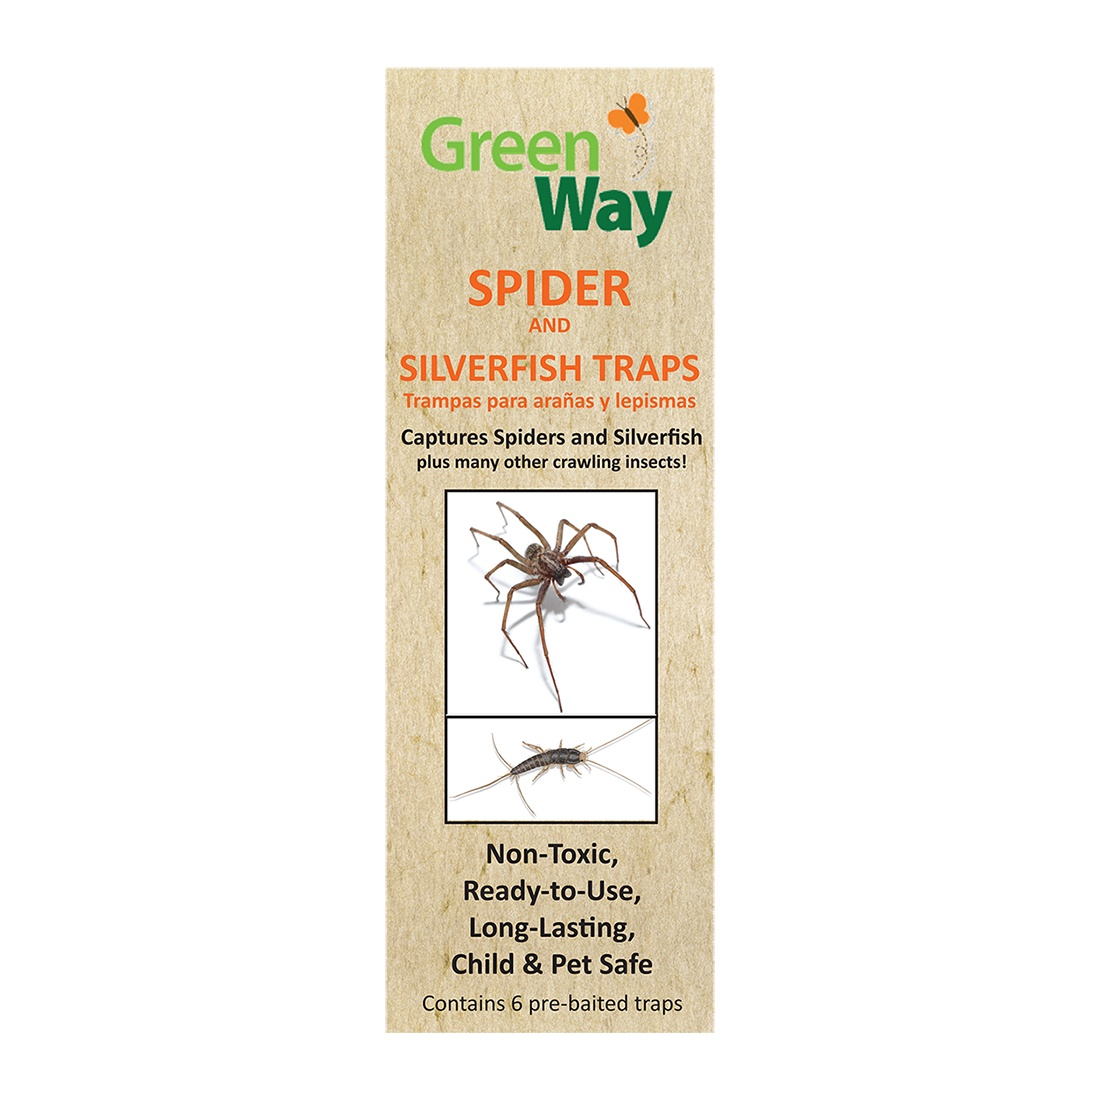 Greenway Spider and Silverfish Trap